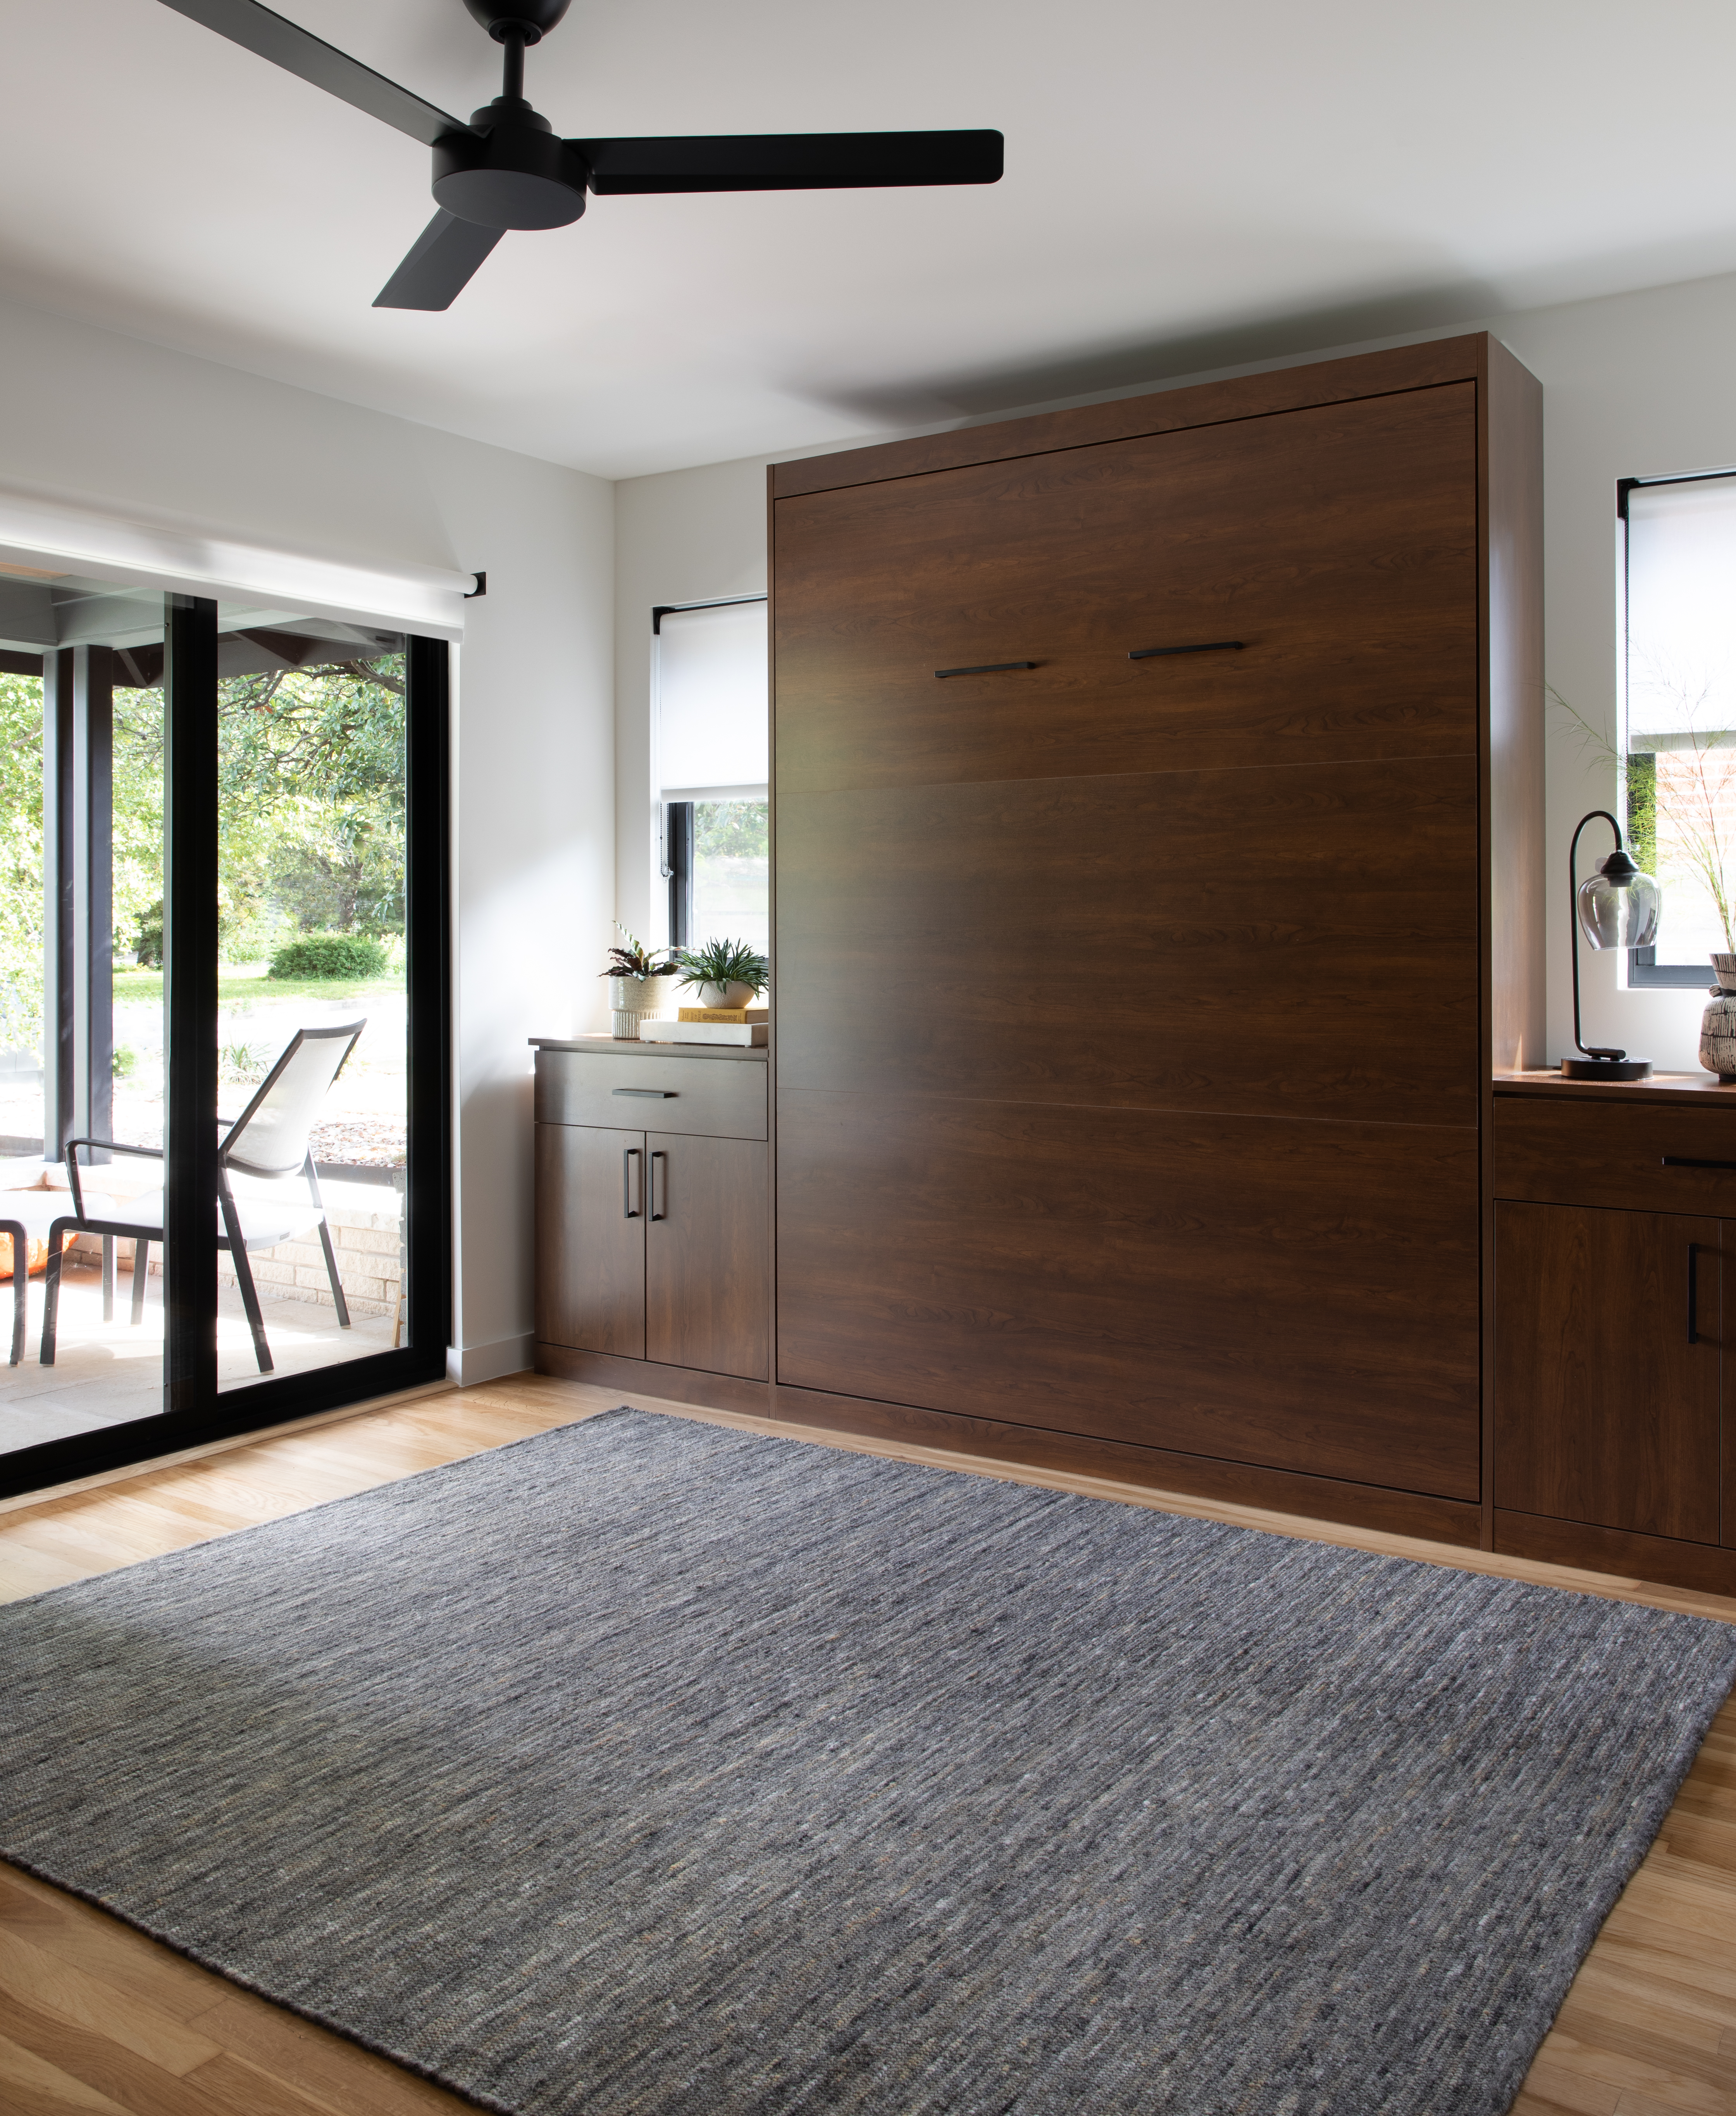 "Maximize space with our Murphy beds. Transform your room effortlessly from day to night, combining functionality and style. Discover versatile solutions for small spaces. Explore our Murphy bed collection now!"